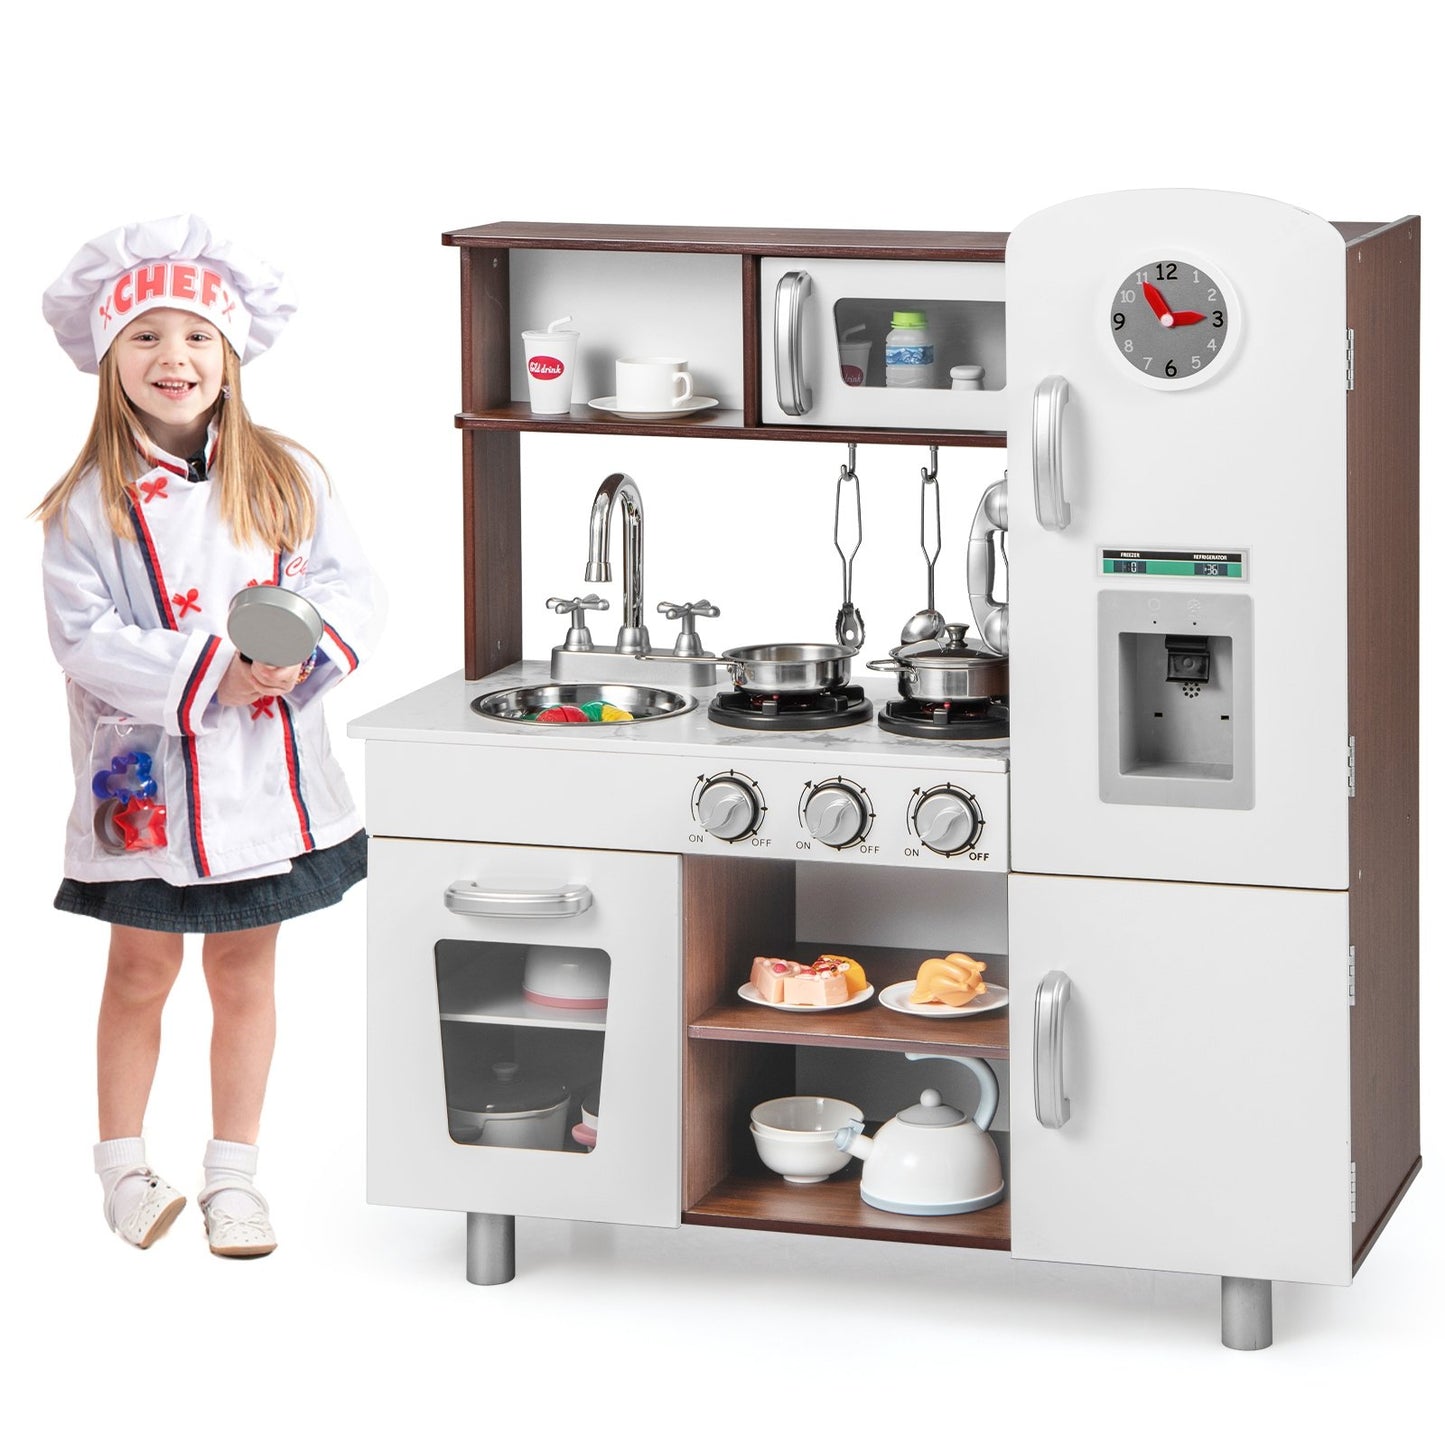 Kids Kitchen Playset with Realistic Sounds and Lights, Brown & White